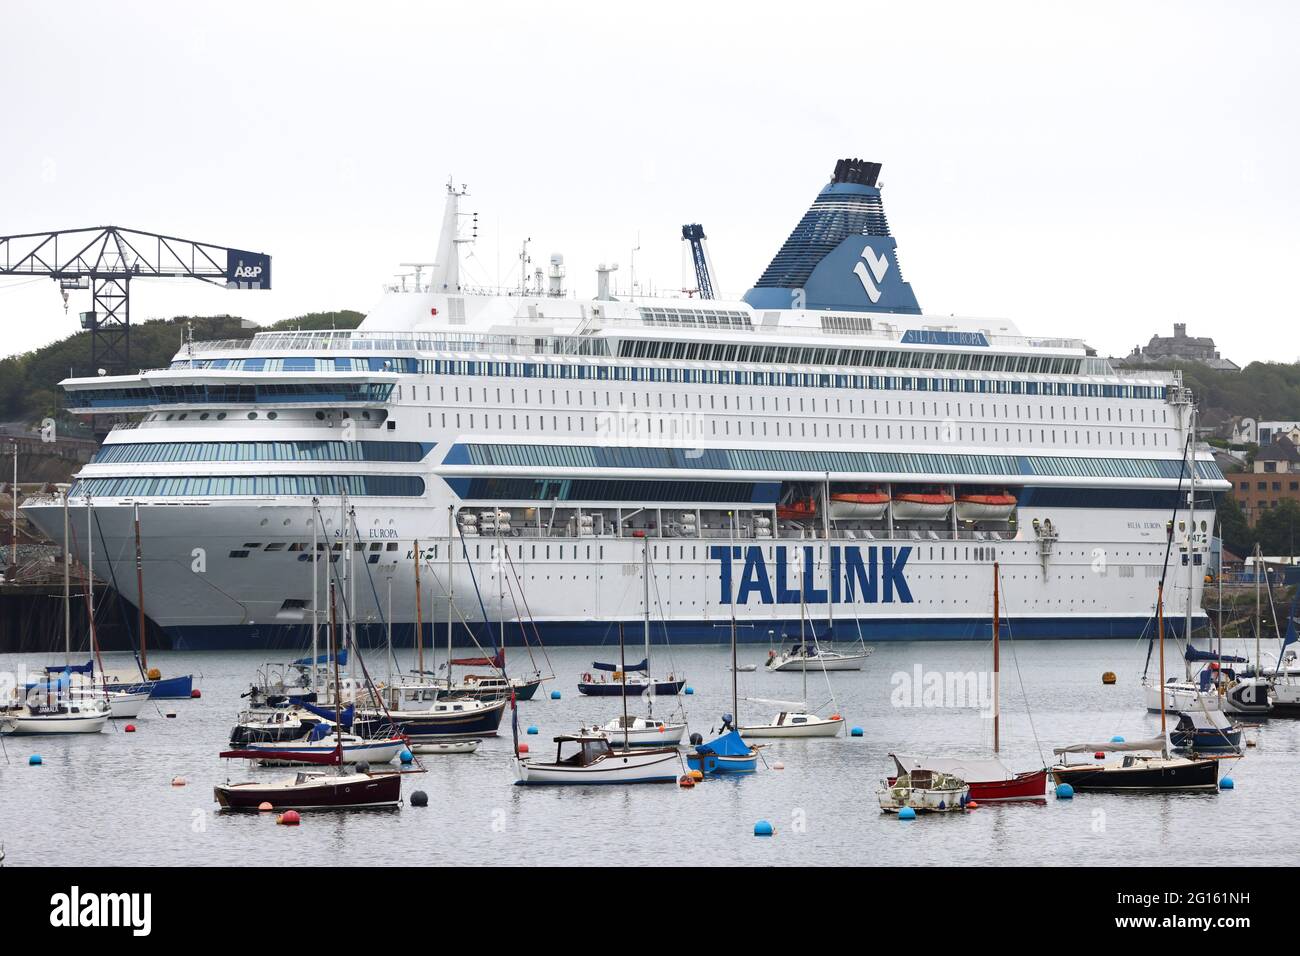 The cruise liner 'Silja Europa', which will host police officers during the G7 summit, is docked in Falmouth Harbour, Cornwall, Britain, June 5, 2021. REUTERS/Tom Nicholson Stock Photo